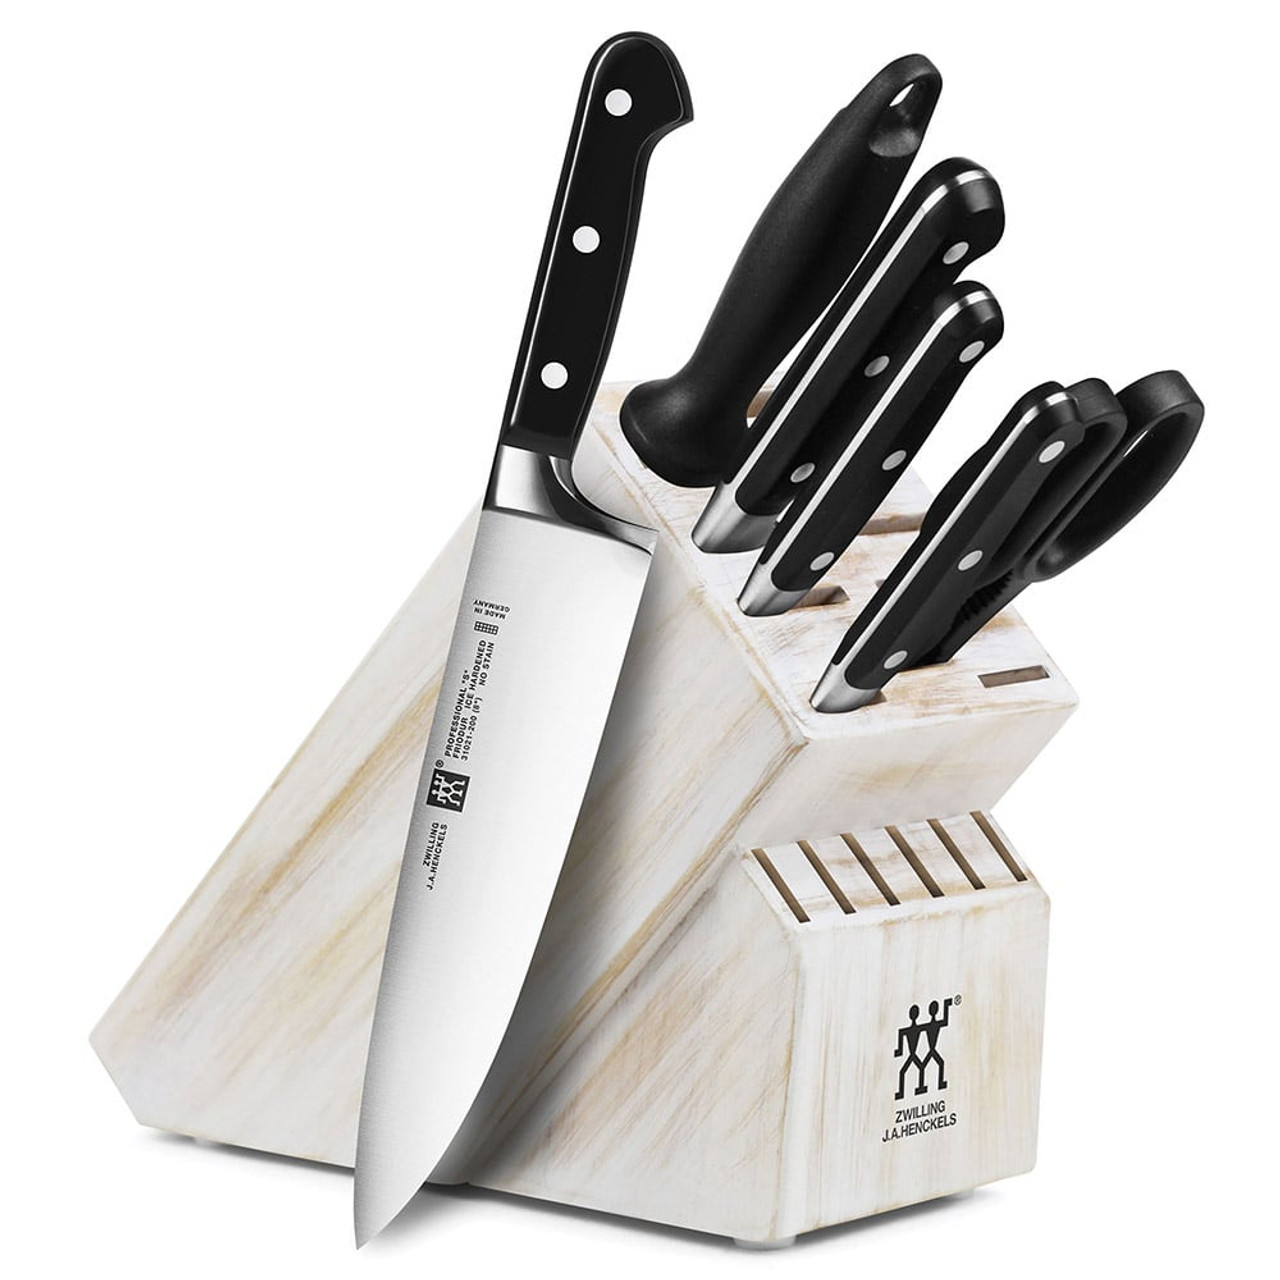 https://cdn11.bigcommerce.com/s-hccytny0od/images/stencil/1280x1280/products/2643/9335/zwilling-professional-s-7pc-knife-block-set-rustic-white__65470.1564319401.jpg?c=2?imbypass=on